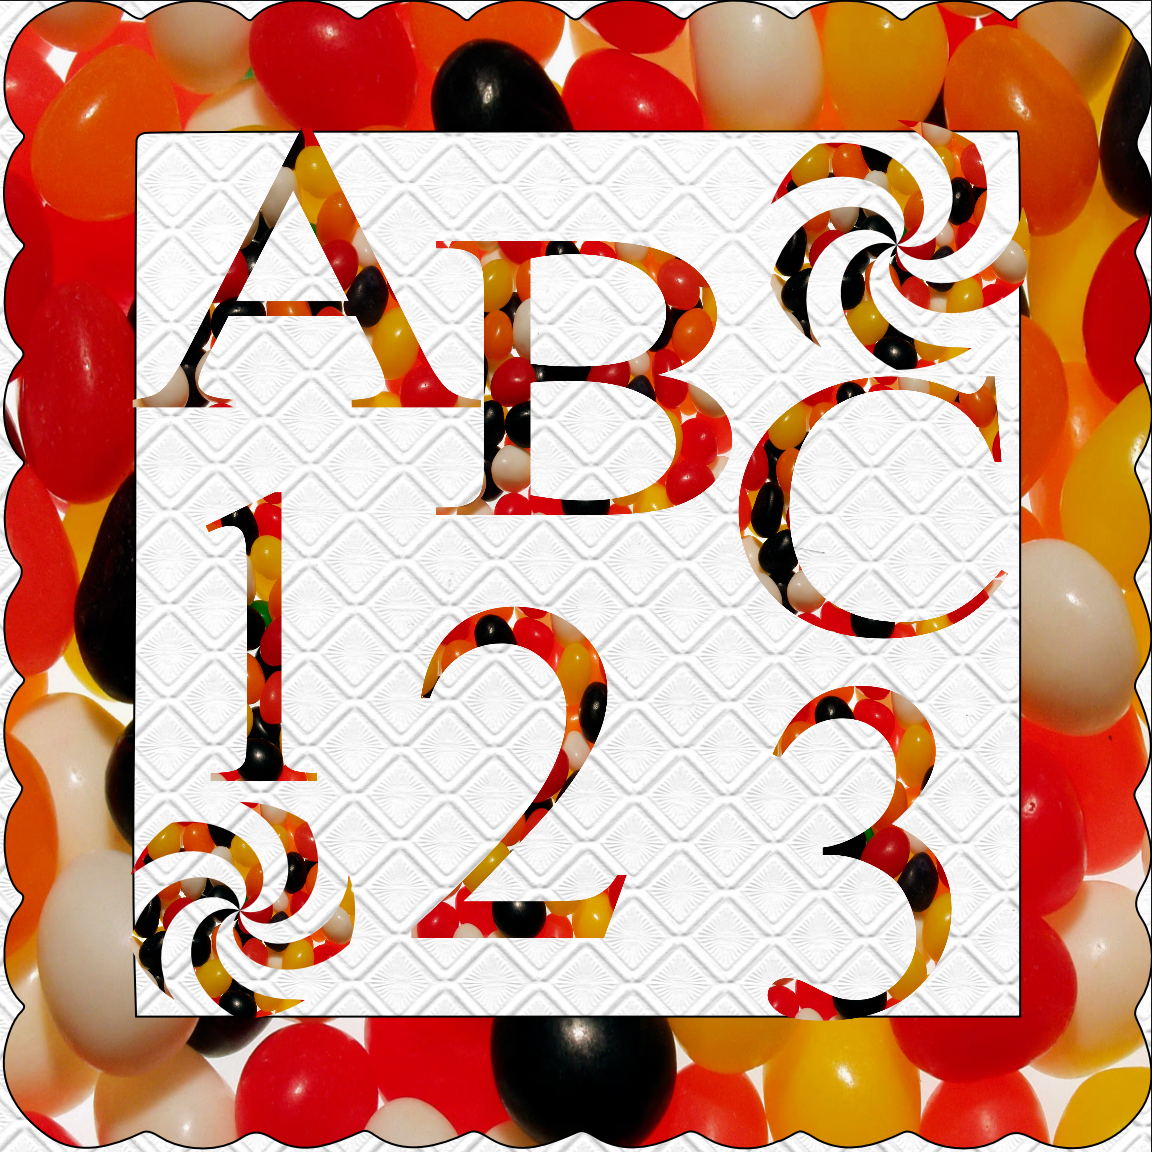 Primary image for ABC and Numbers 66a-Digital ClipArt-Fonts-Candy-Art Clip-Gift Tag-Scrapbook